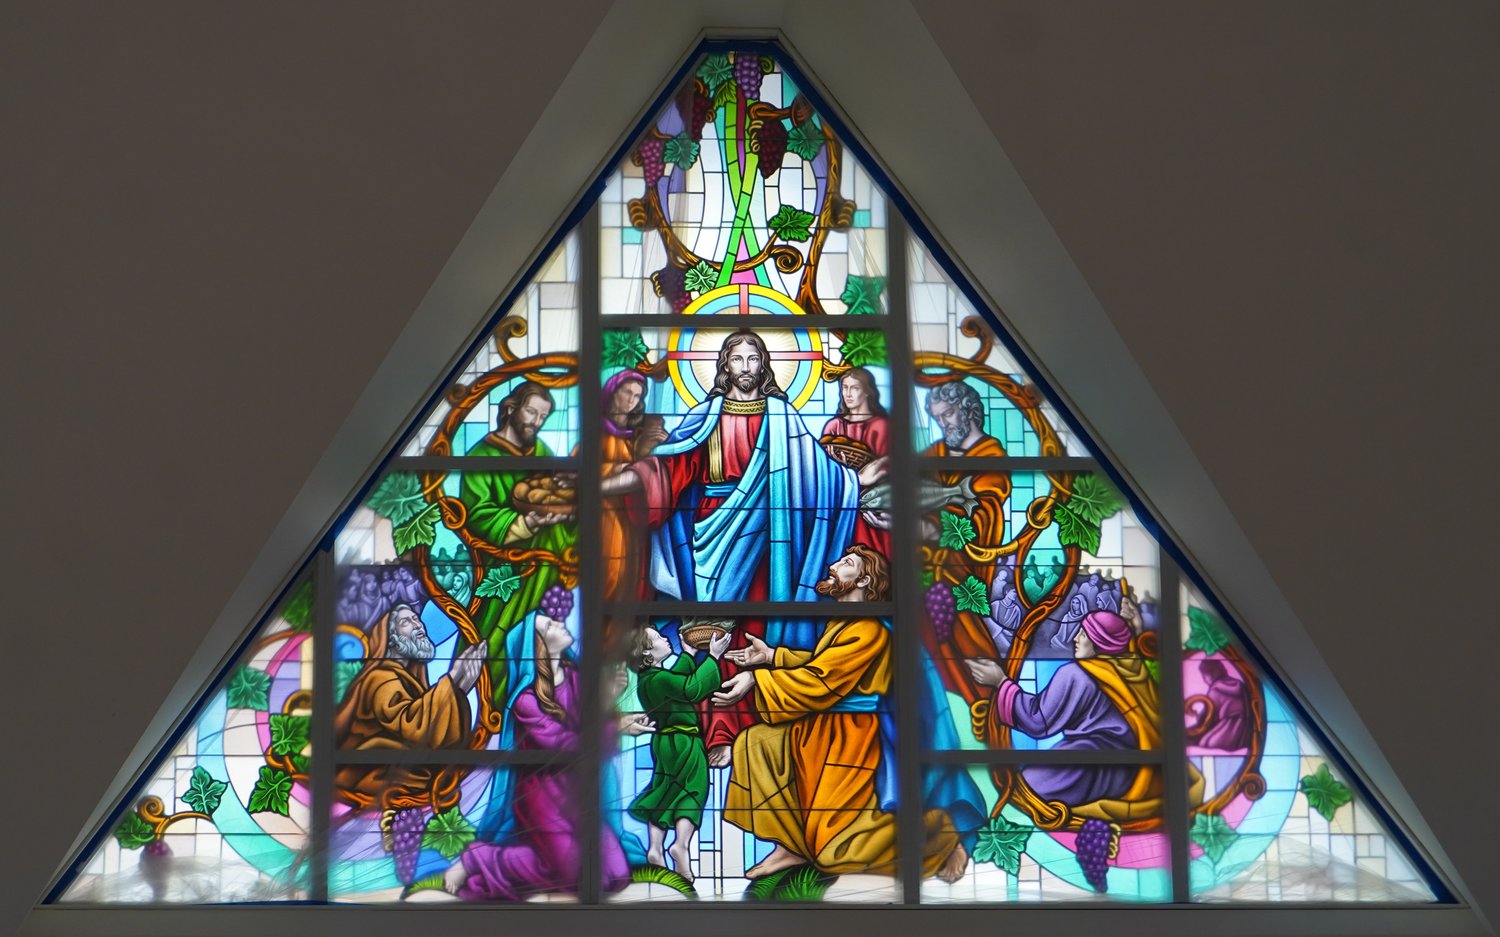 This newly created stained-glass window (partially covered in clear plastic for protection), depicting Jesus feeding the 5,000, is one of three that have been installed in the Cathedral of St. Joseph in Jefferson City as part of an extensive renovation, expansion and upgrade of the 54-year-old Cathedral. An additional nine windows are scheduled to be installed by year’s end.